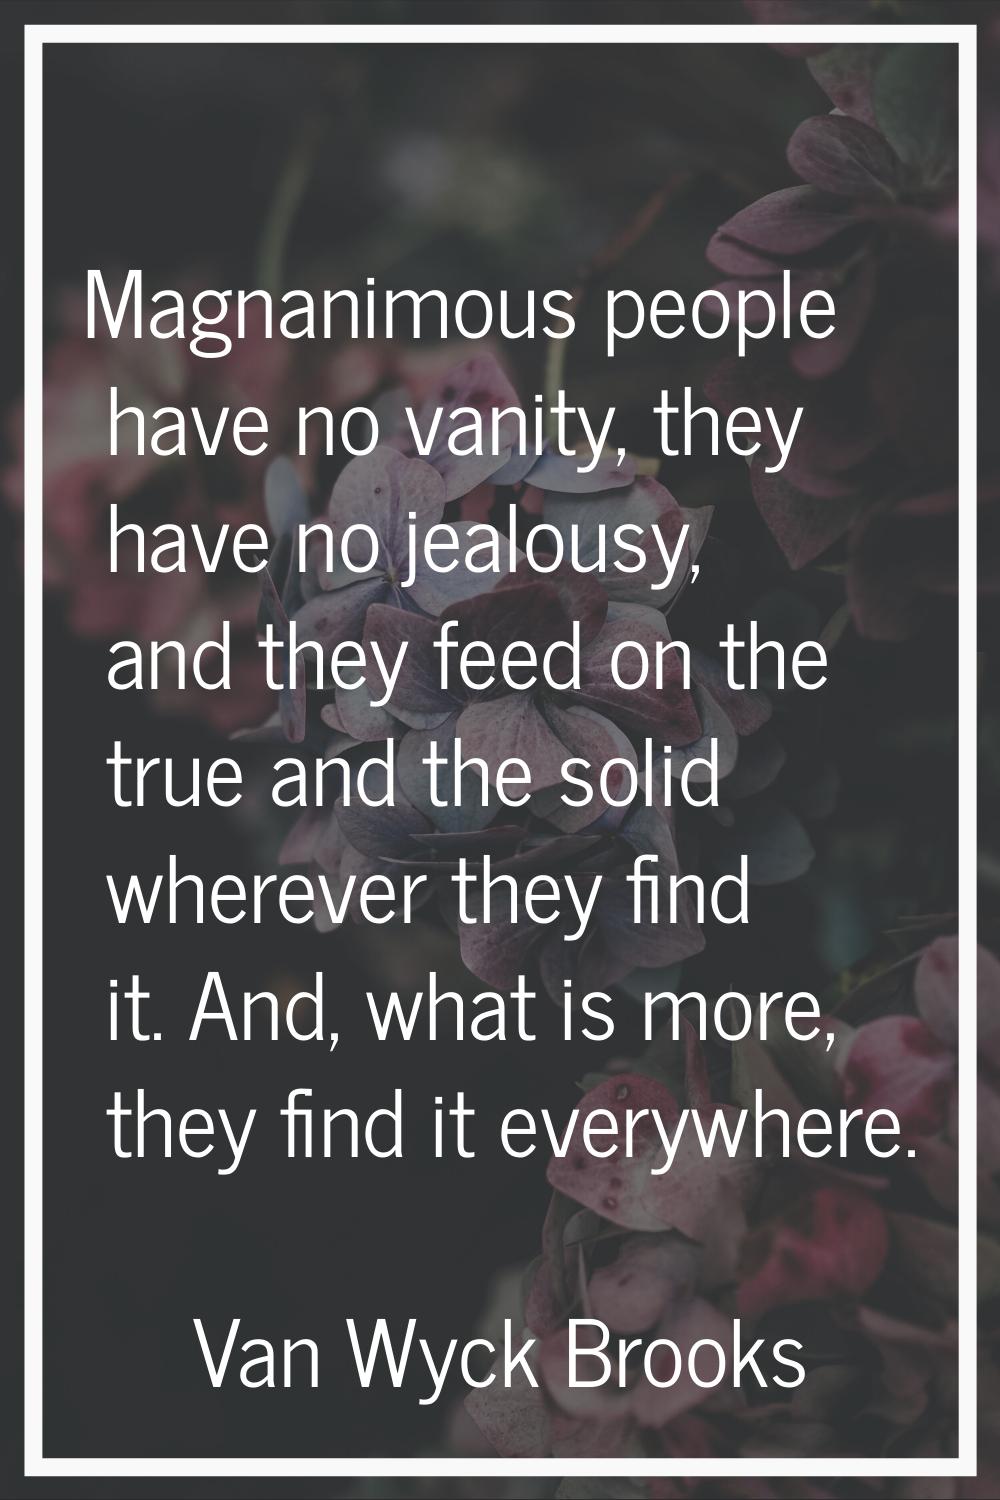 Magnanimous people have no vanity, they have no jealousy, and they feed on the true and the solid w